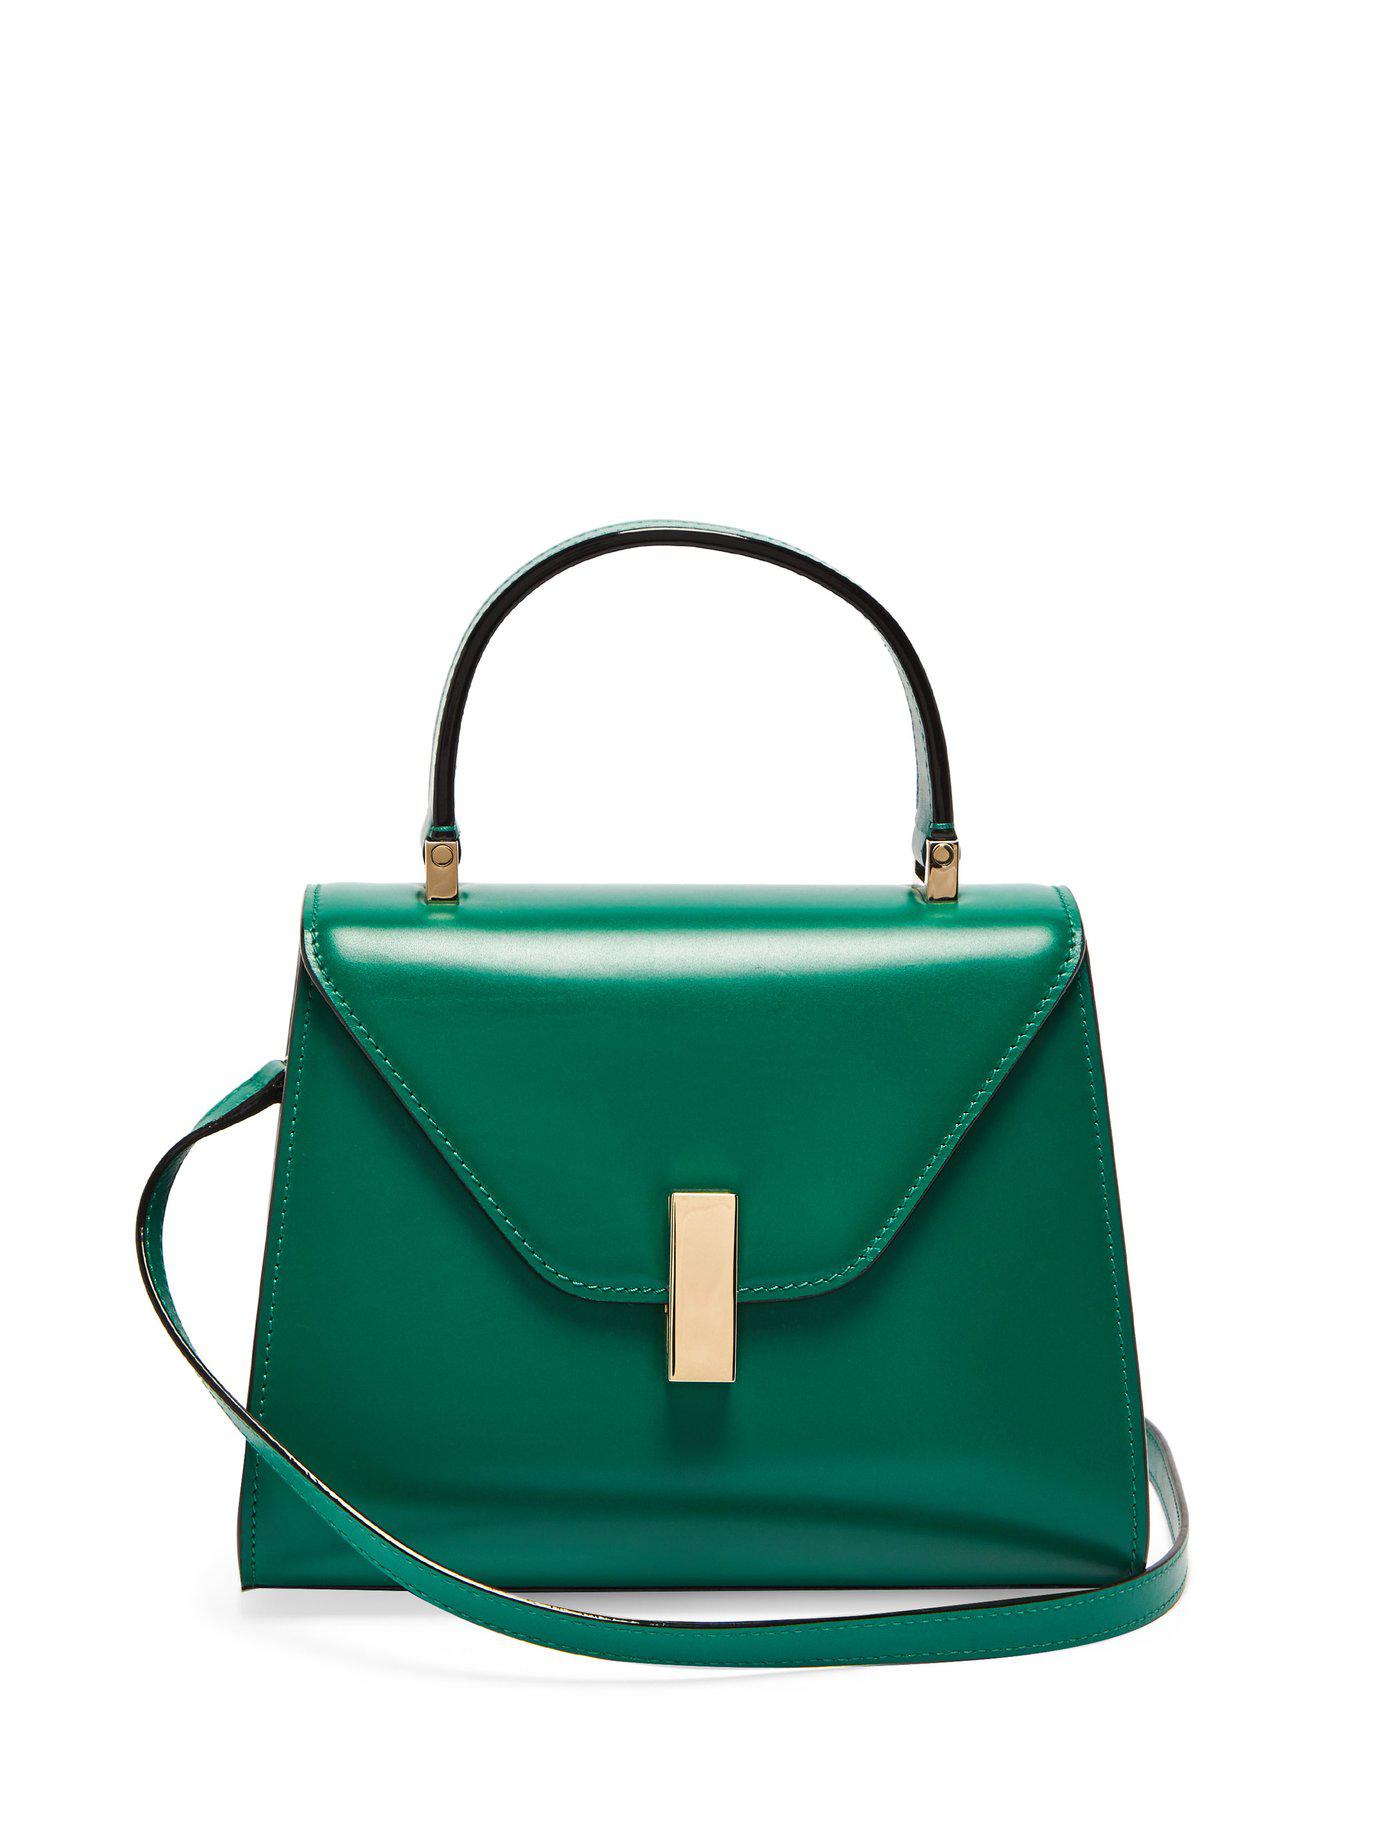 Valextra Iside Mini Leather Bag in Green - Lyst